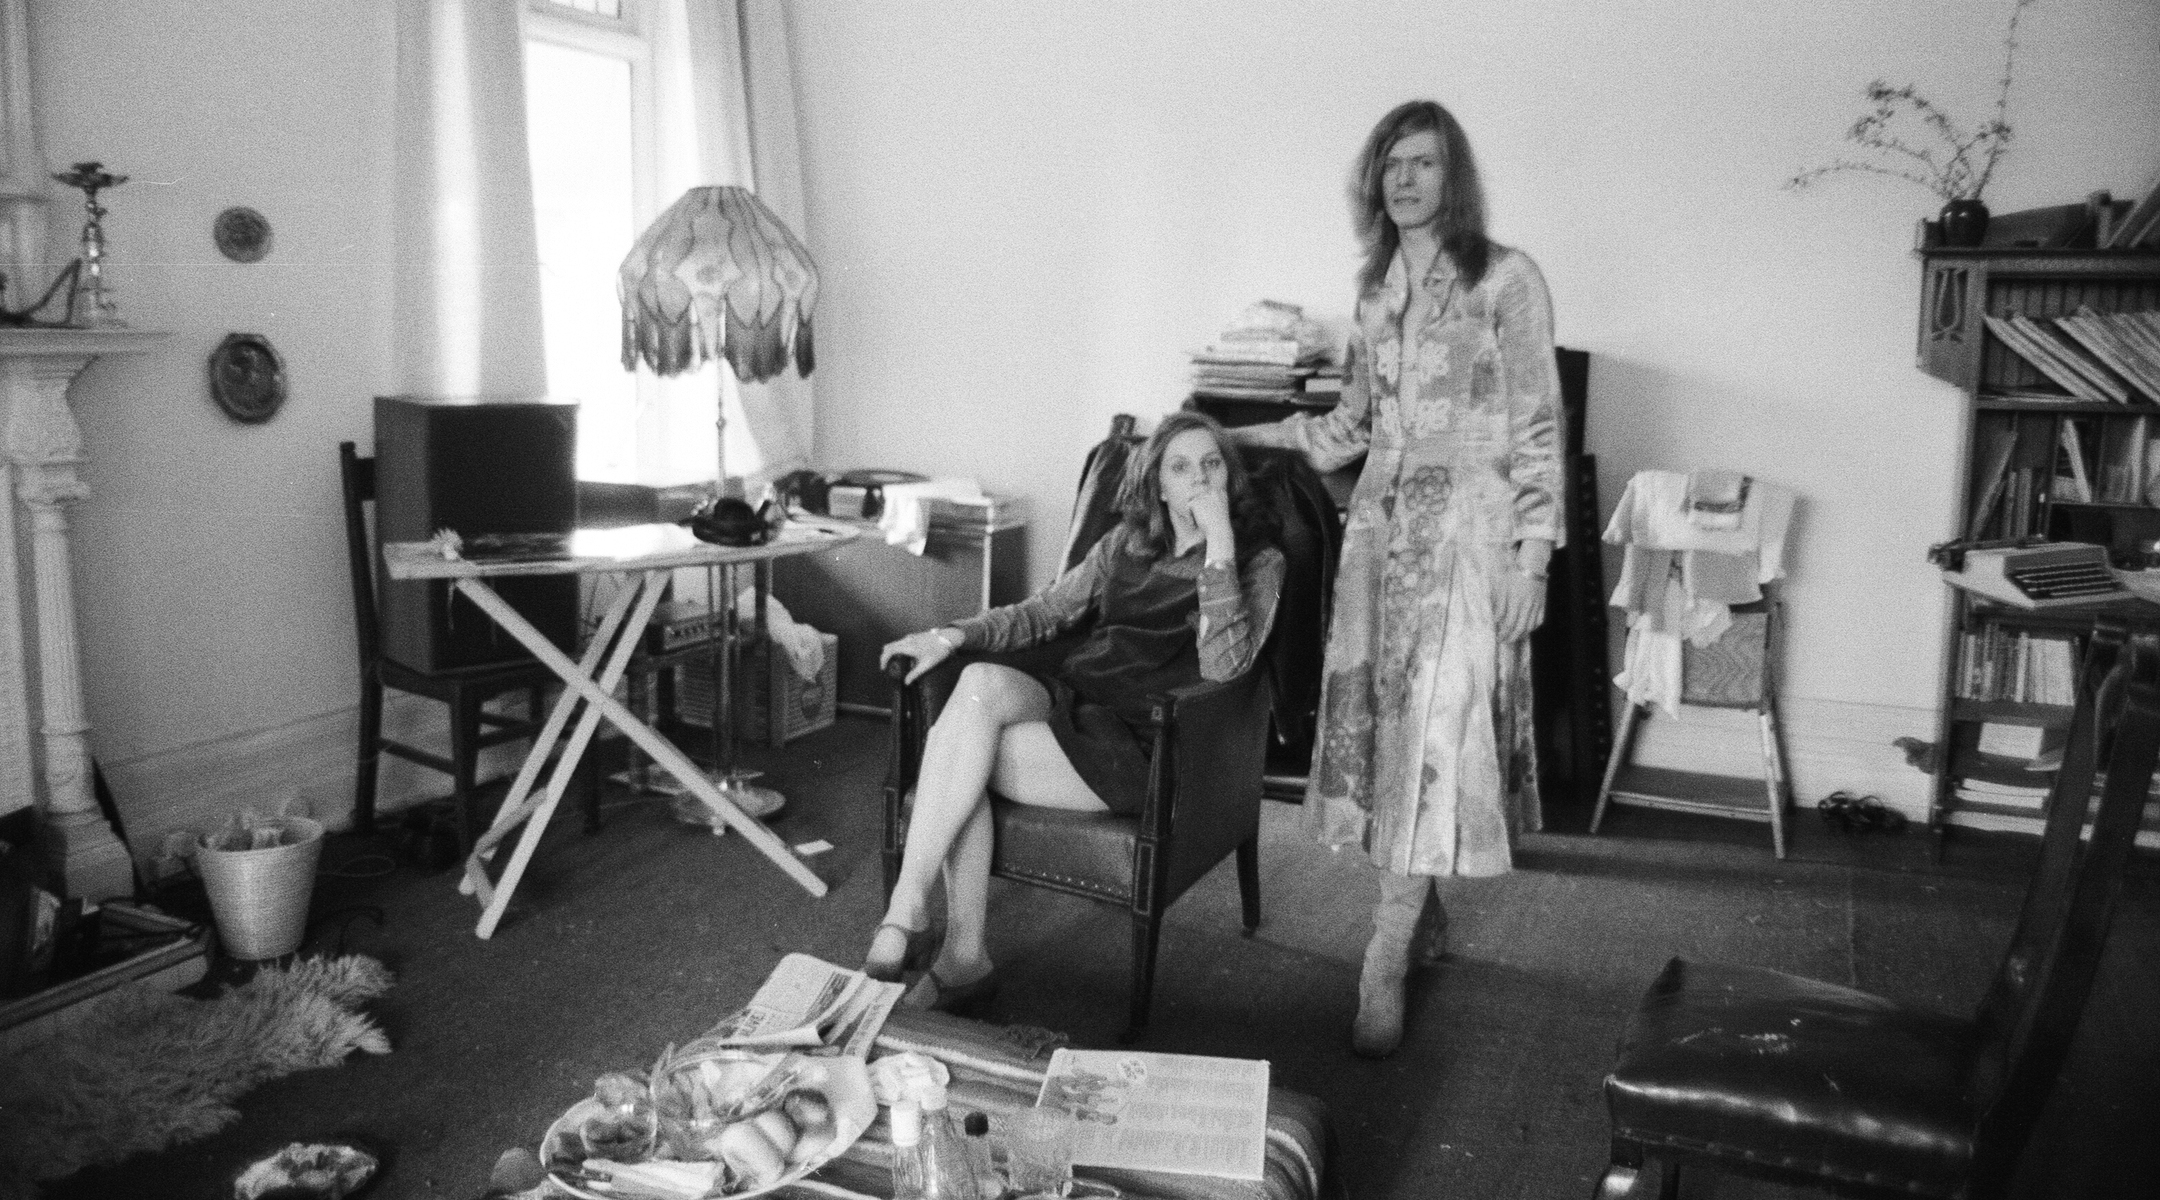 David Bowie, shown with his wife Angie at home in Kent, England, in 1971, is wearing a dress that he famously wore on the cover of his “The Man Who Sold the World” album. (Peter Stone/Mirrorpix/Getty Images)